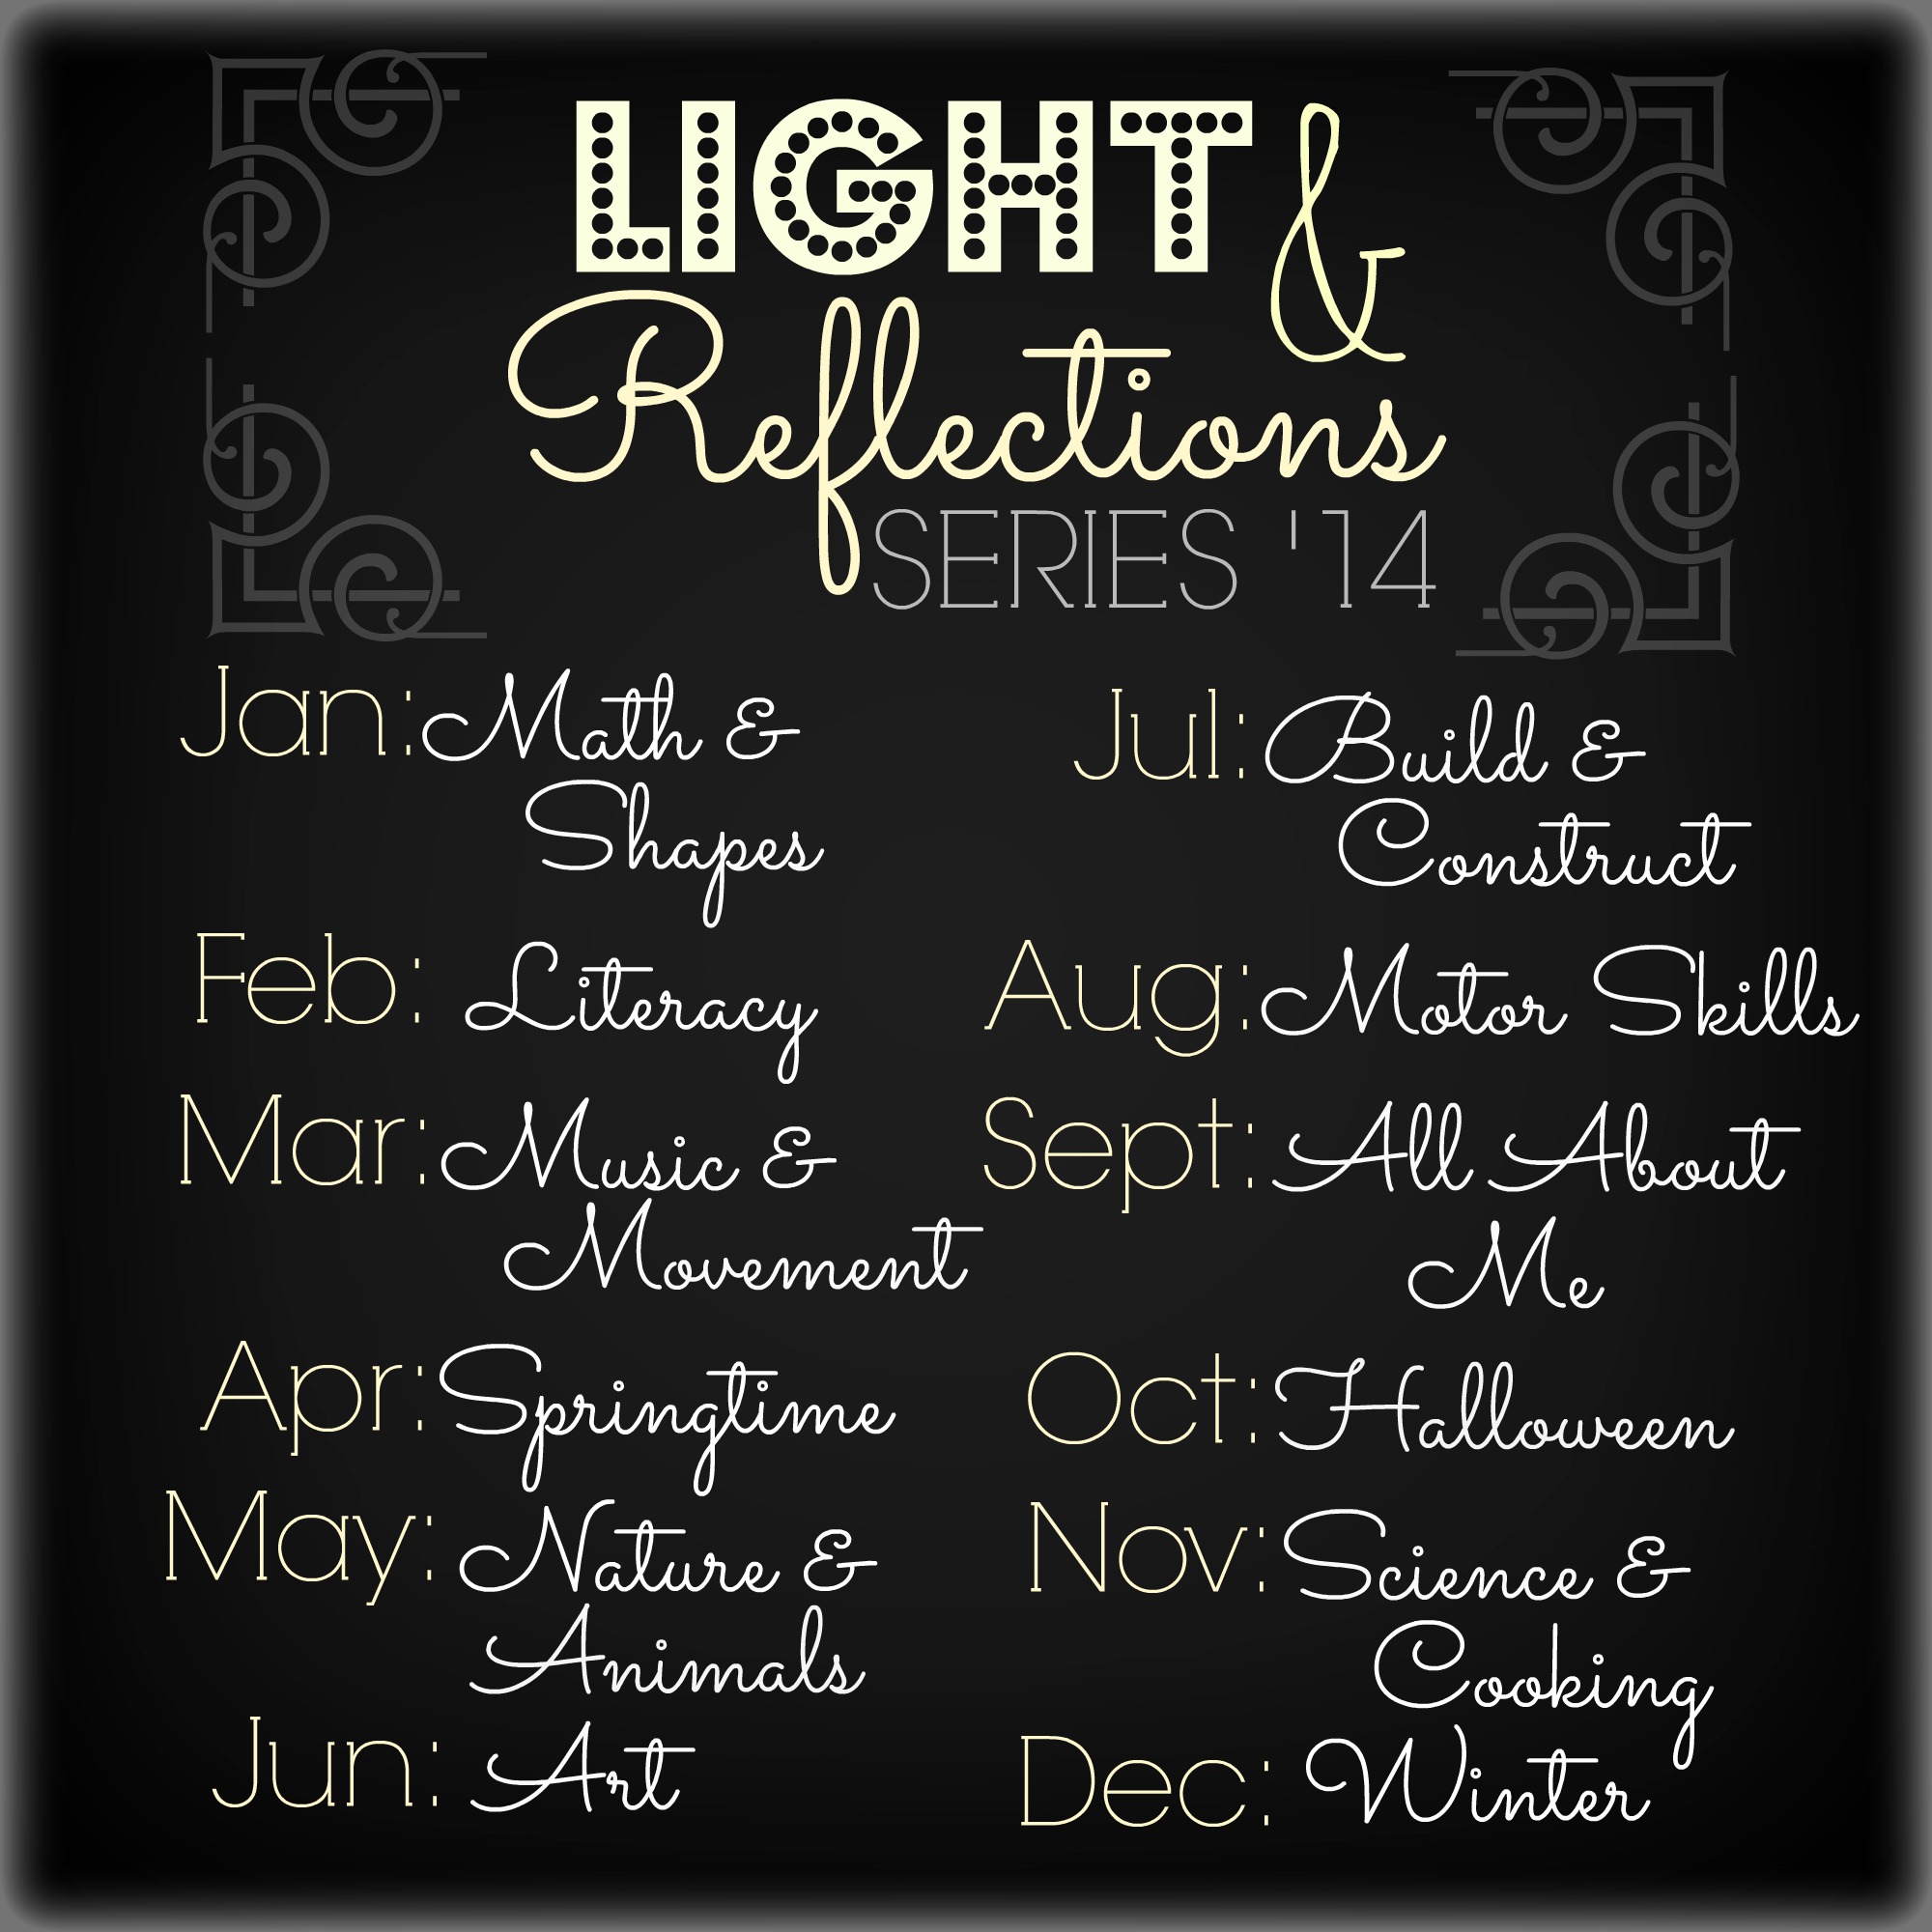 Light and reflection series for 2014